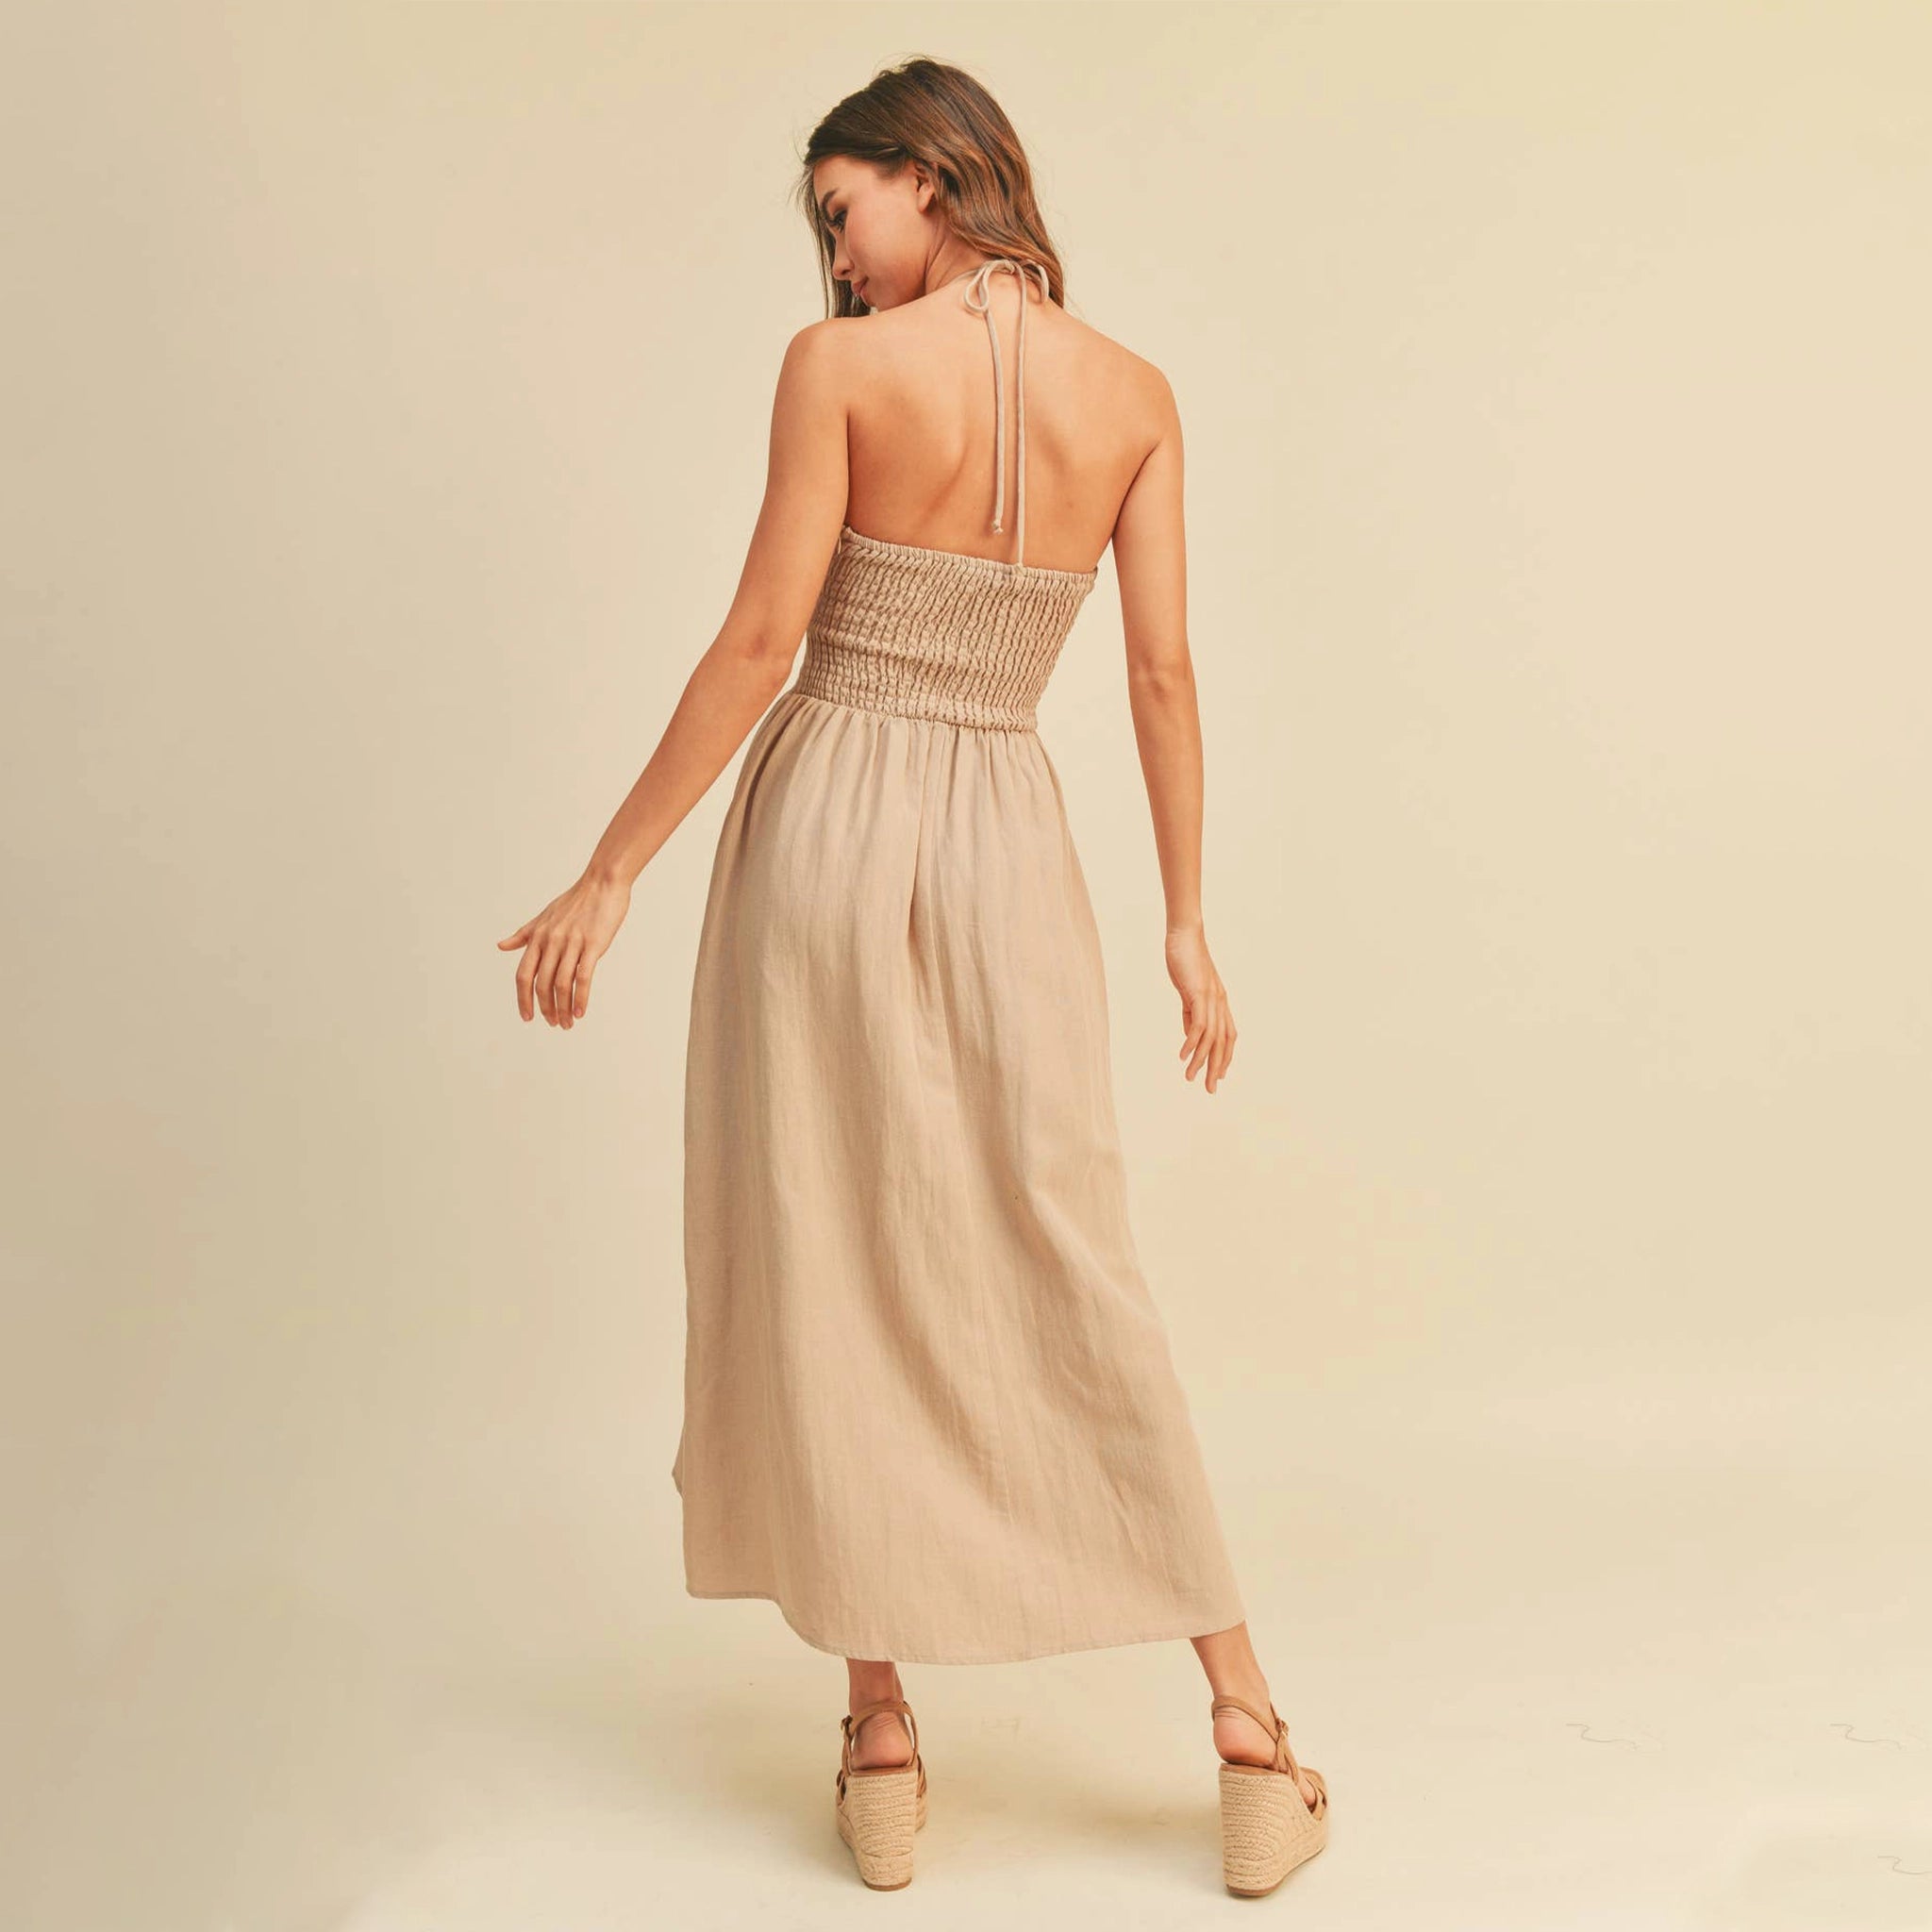 On a tan background is a model wearing the neutral Knotted Front Halter Neck Dress in the shade stone.